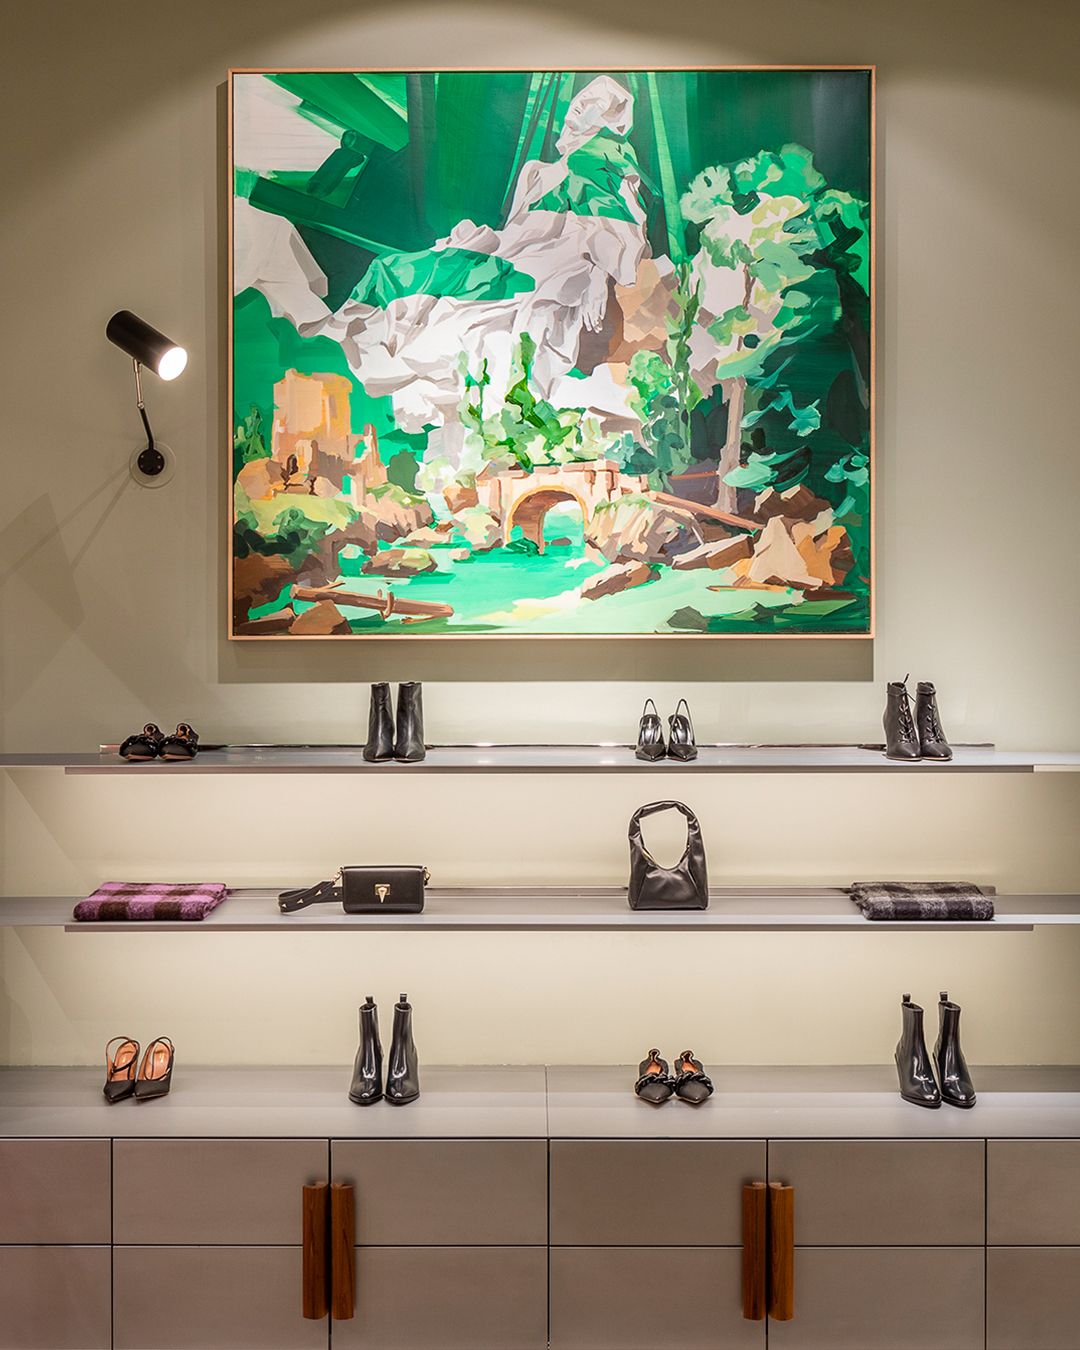 Display shelves of shoes and boots with painting hanging above depicting mountain covered in greenery and stone